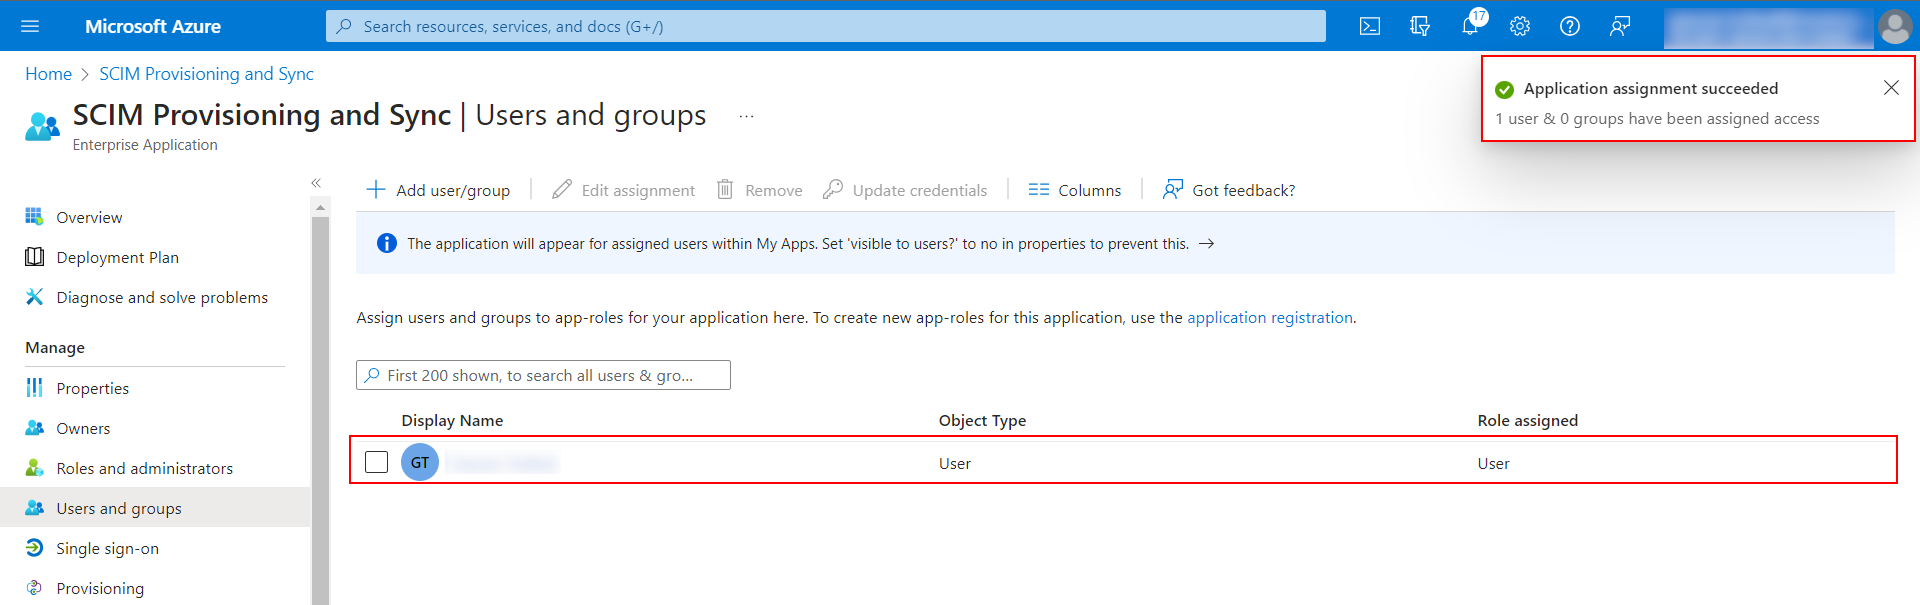 DotNetNuke (DNN) SCIM User Provisioning with Azure AD | DNN SCIM - The user successfully assi to the application